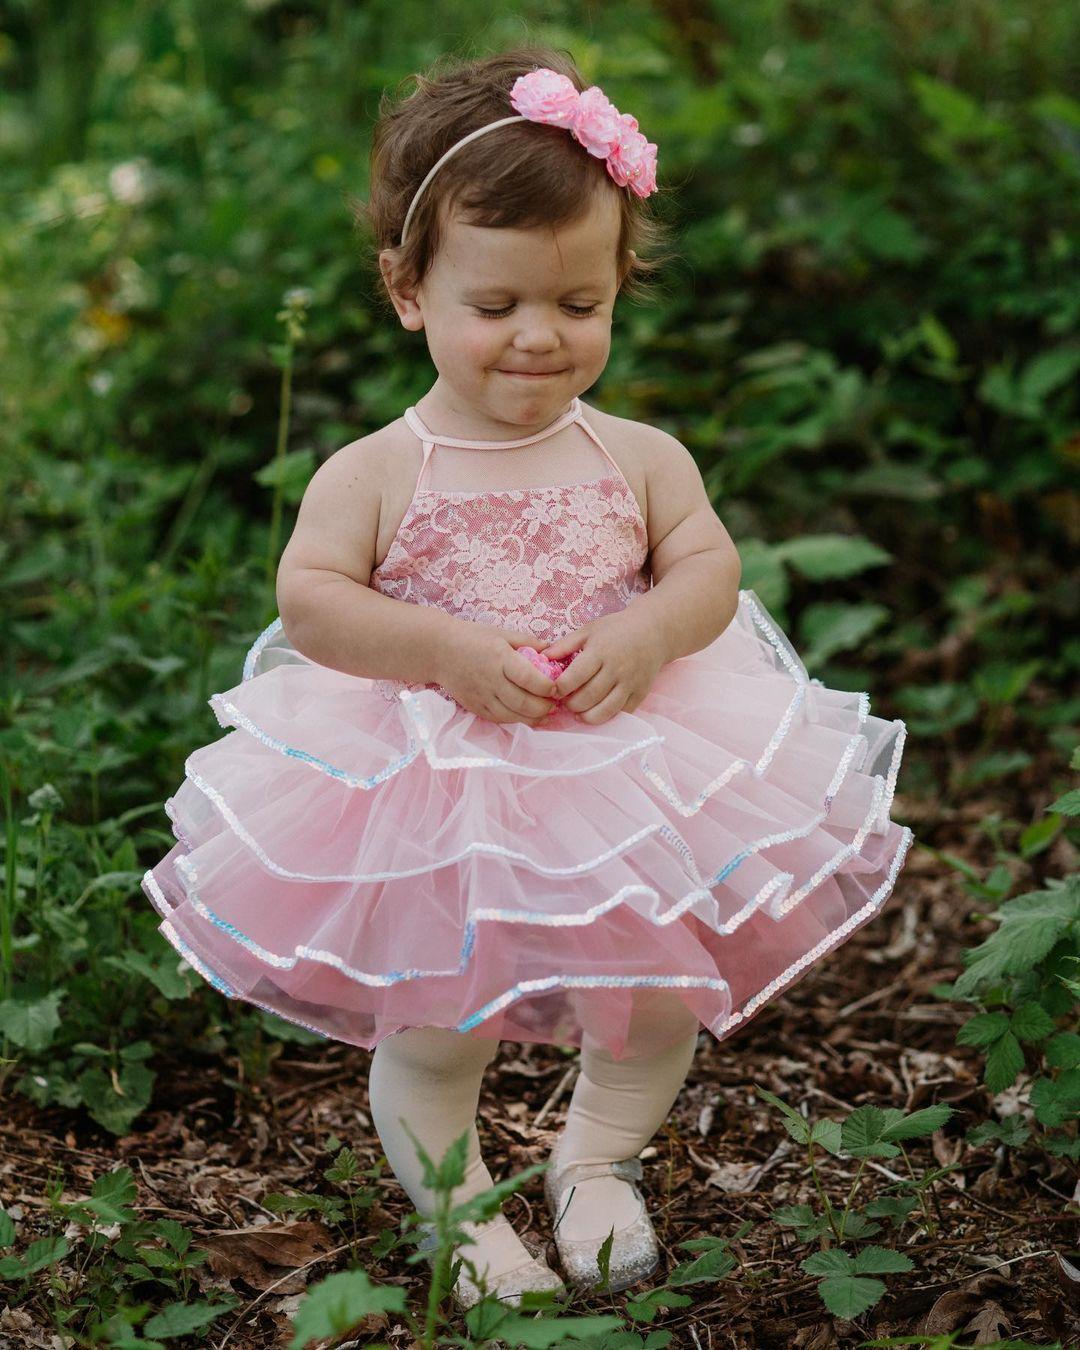 Proud Mom Tori Roloff Gushes About Daughter Lilah's Accomplishments Ahead Of First Dance Recital